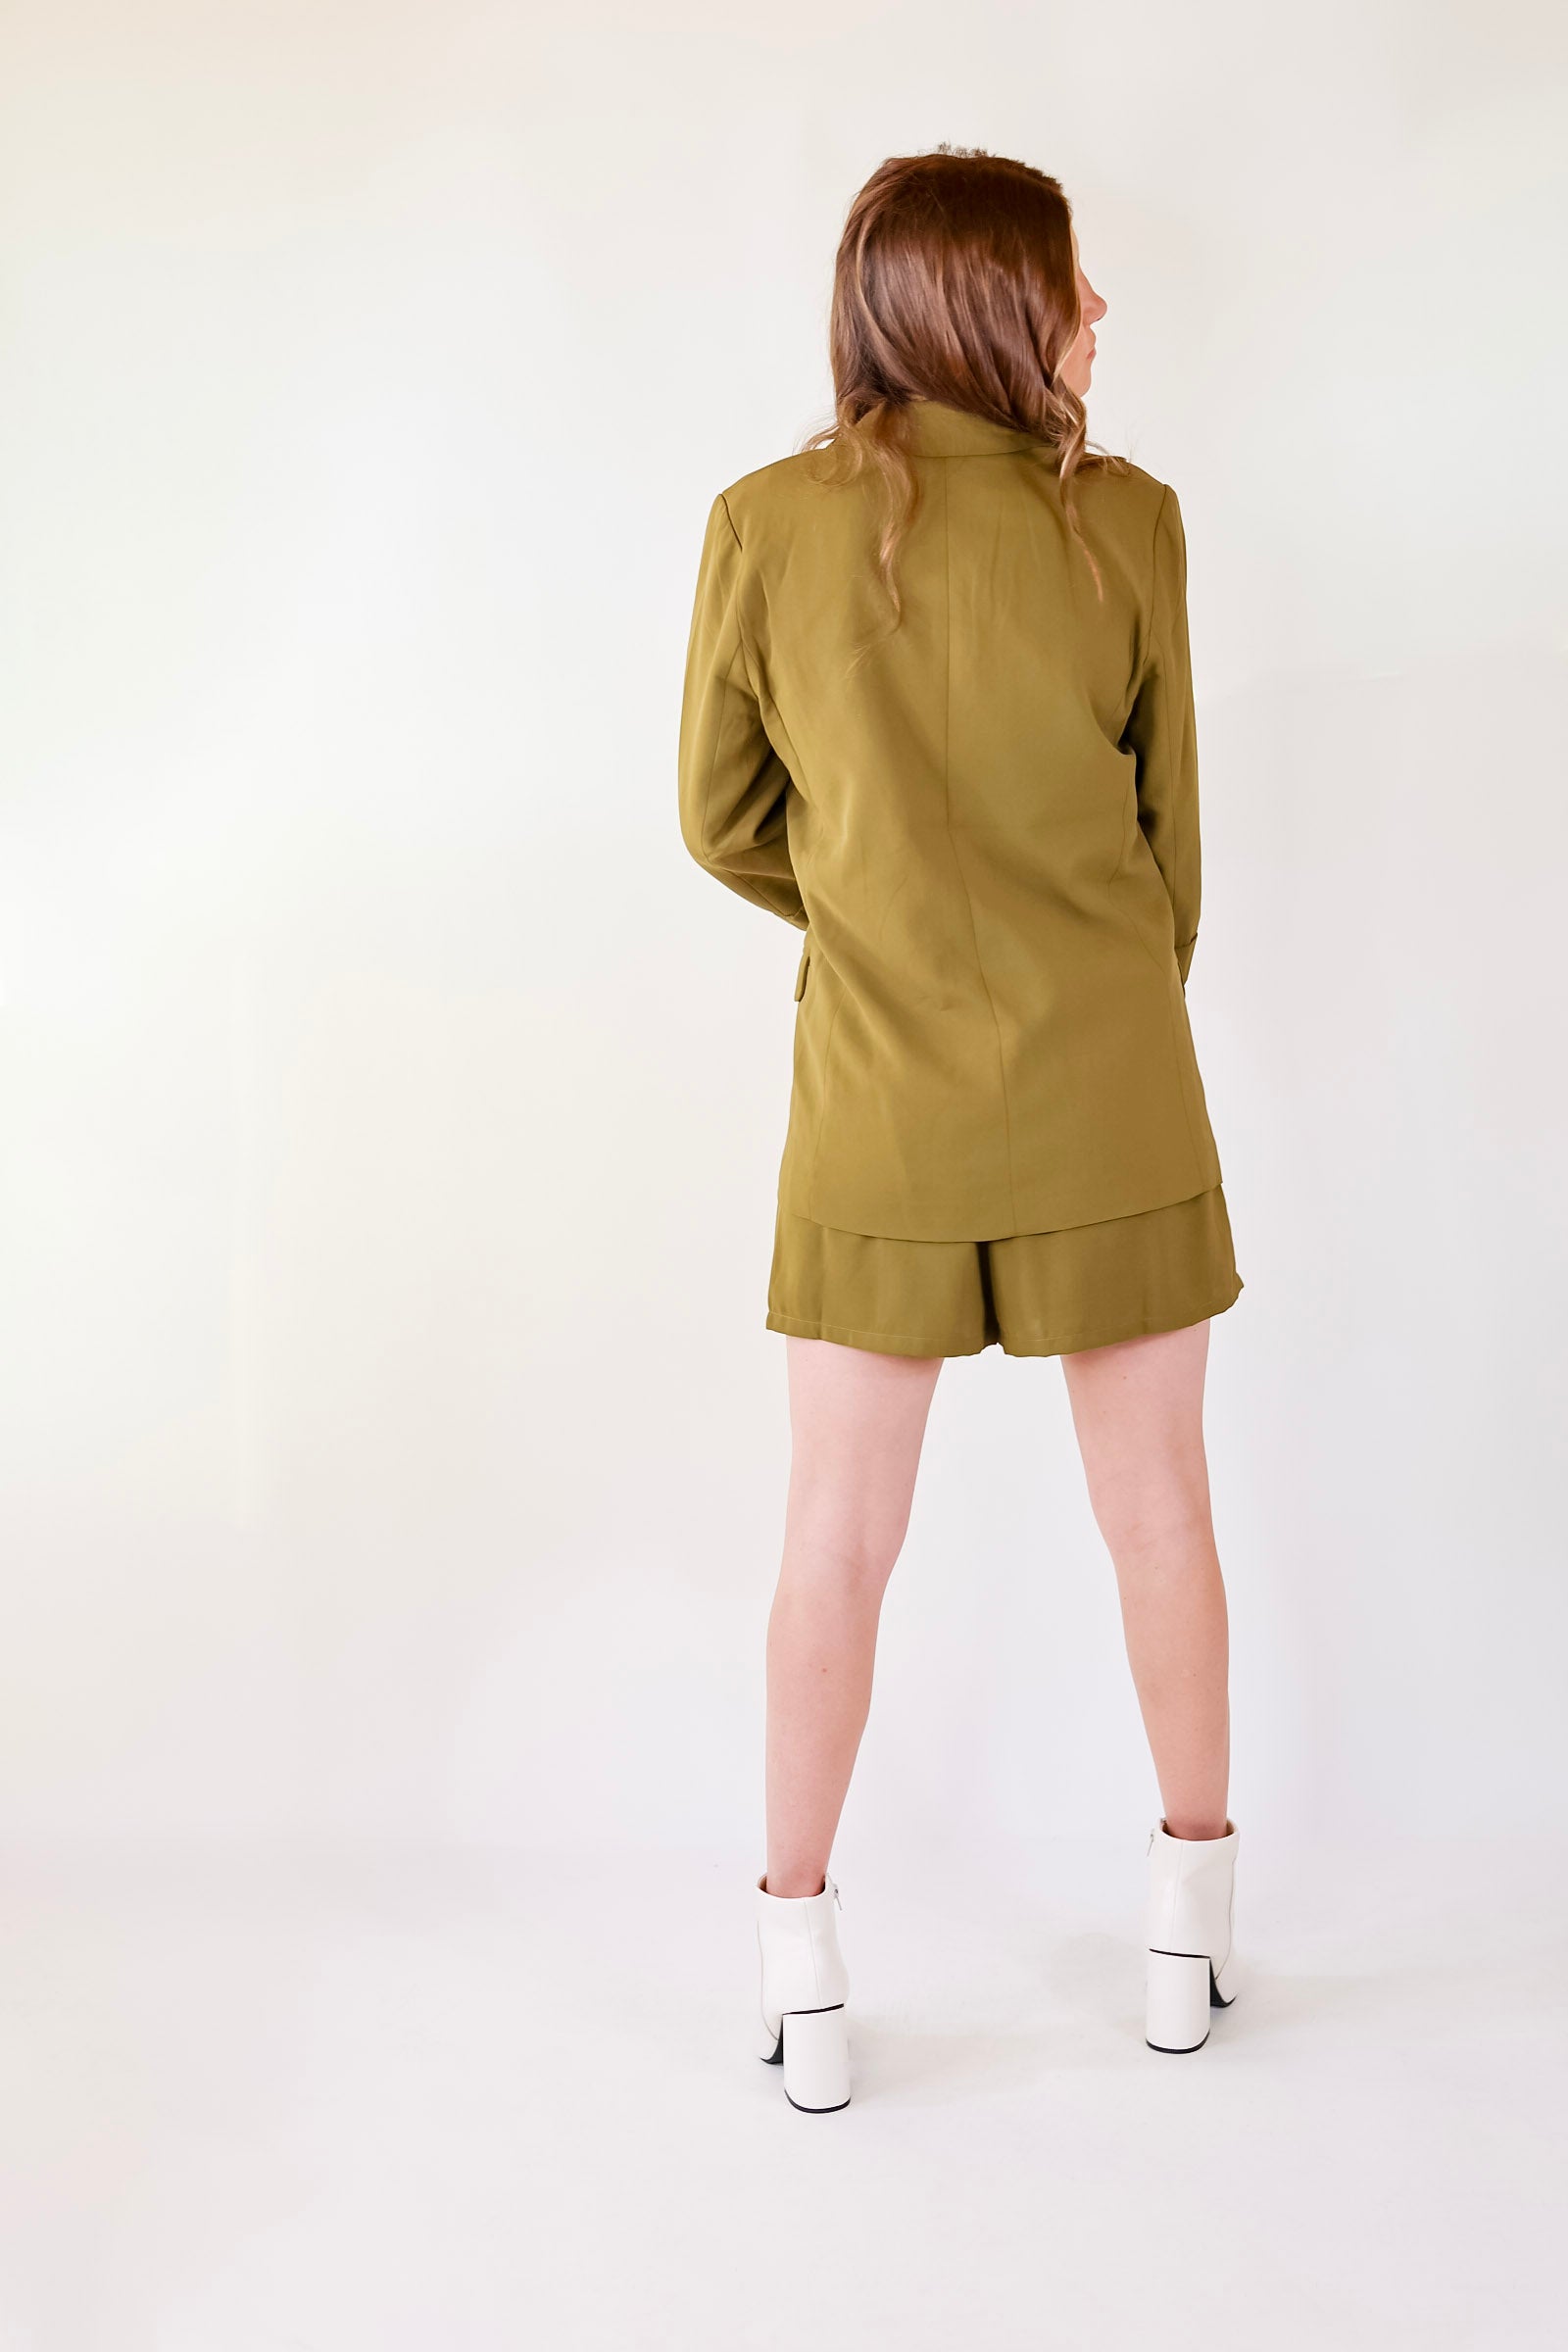 Fine Like Wine Belted Solid Shorts in Olive Green - Giddy Up Glamour Boutique